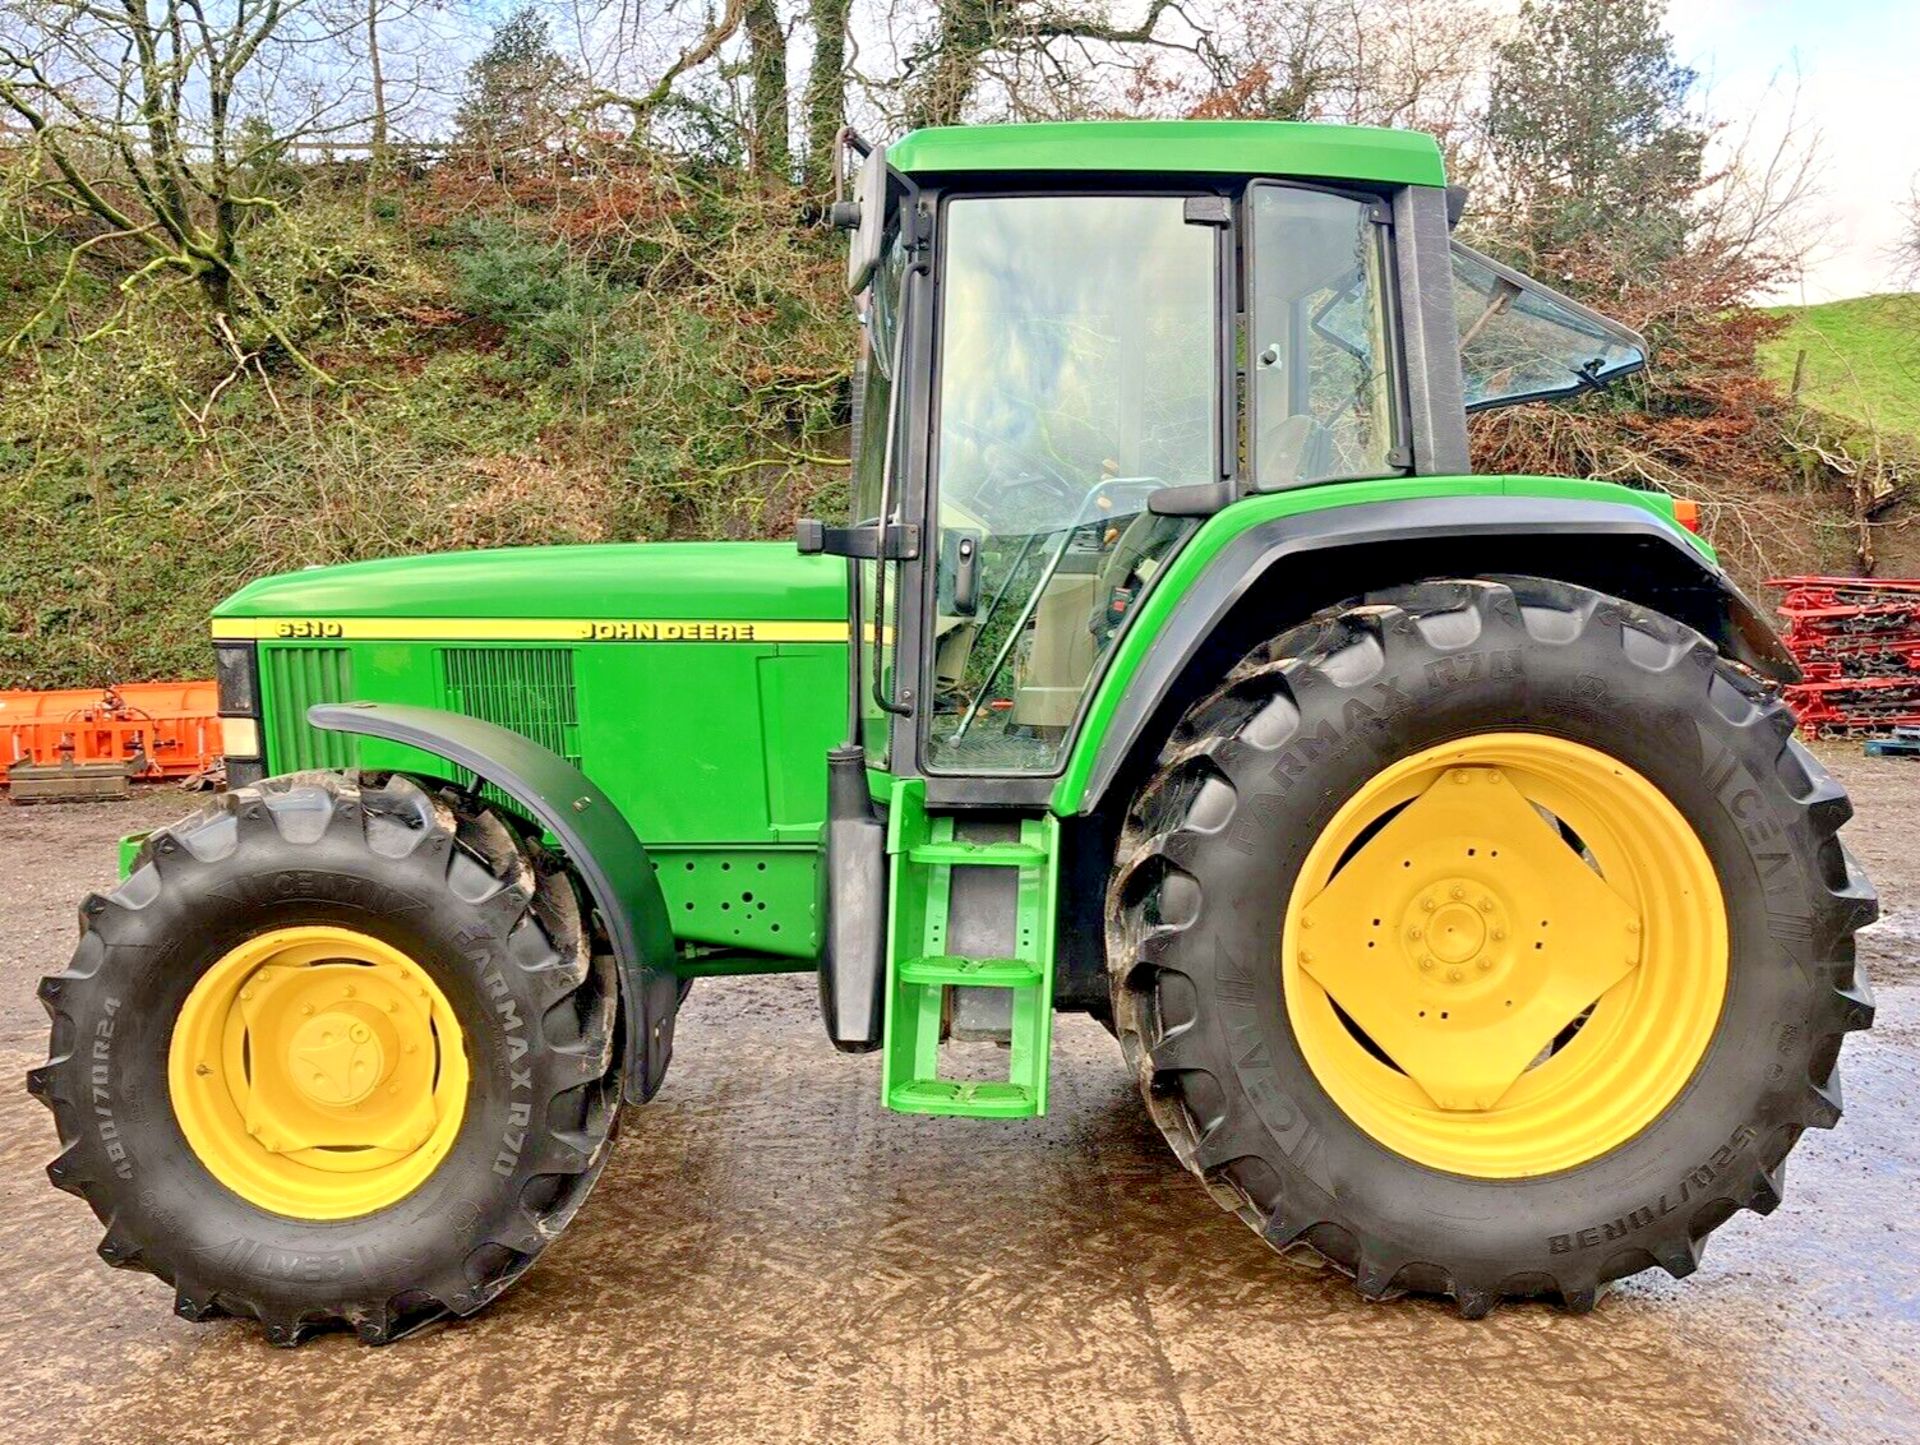 ERA-DEFYING WORKHORSE: JOHN DEERE 6510 PREMIUM - A TRIBUTE TO TRACTOR PROWESS